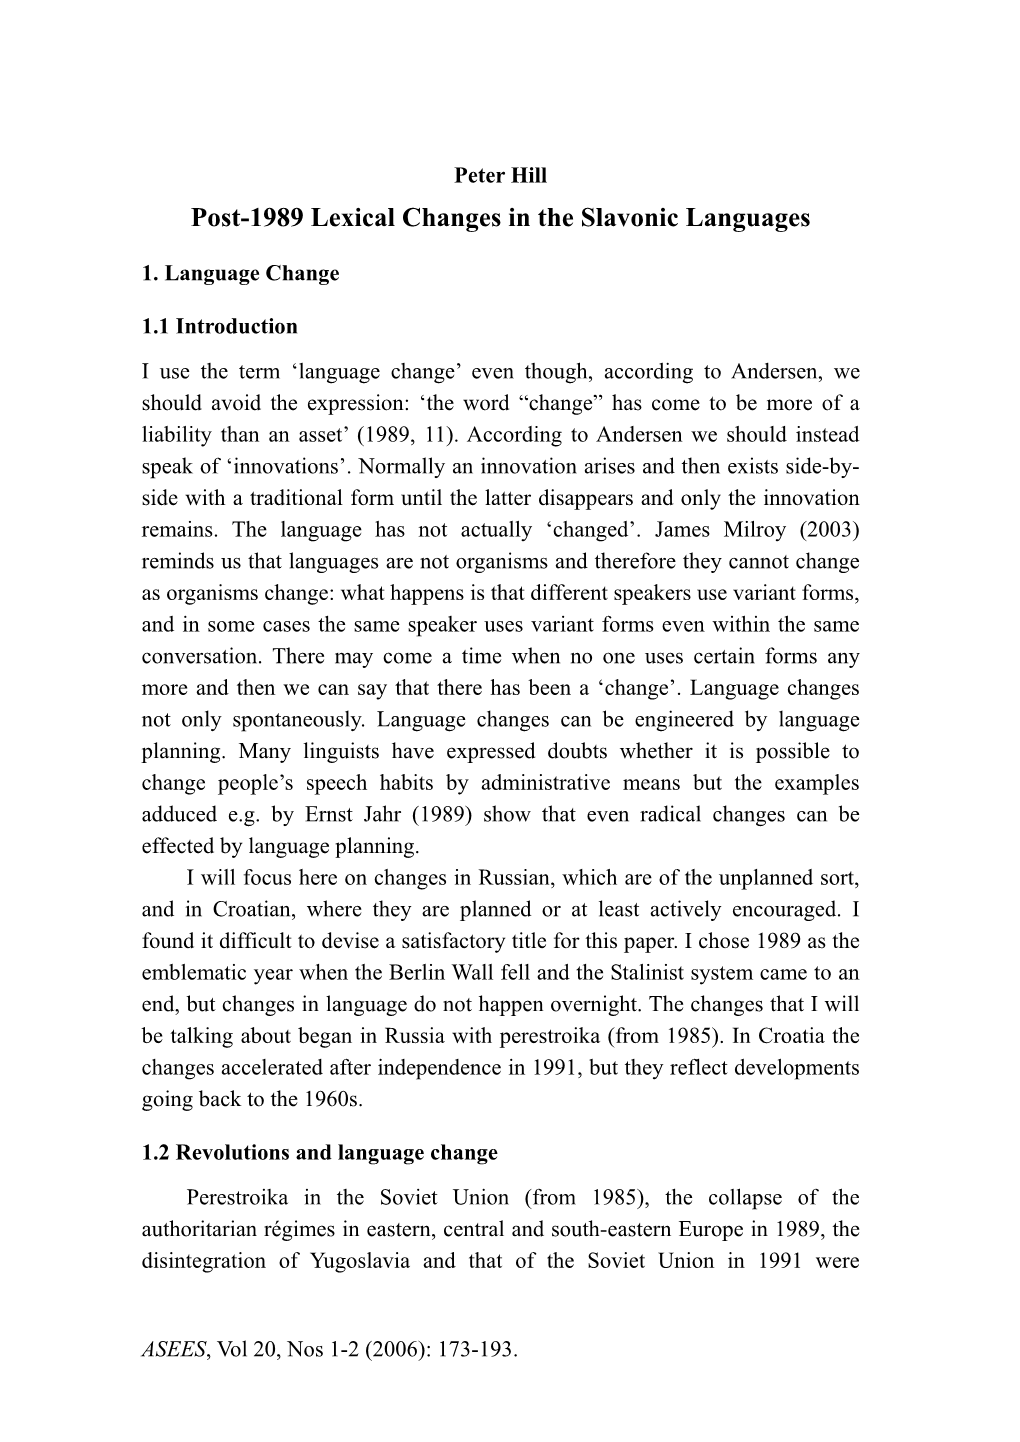 Post-1989 Lexical Changes in the Slavonic Languages